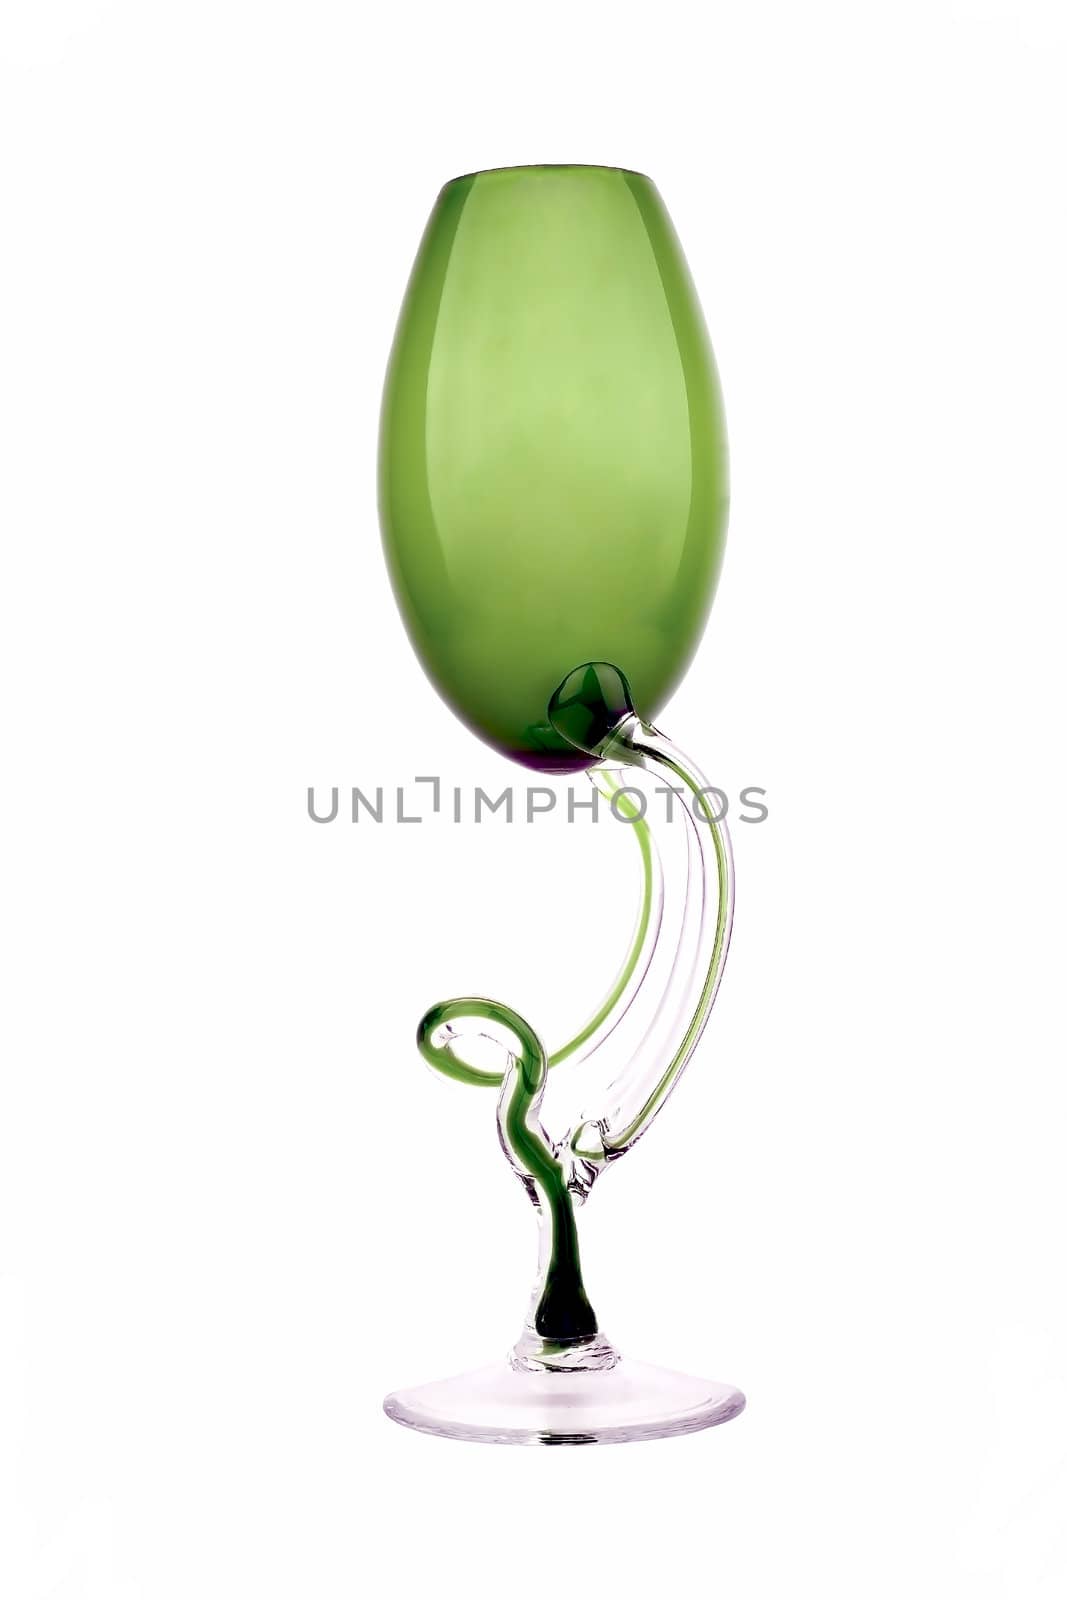 General view of the high green glass on a white background